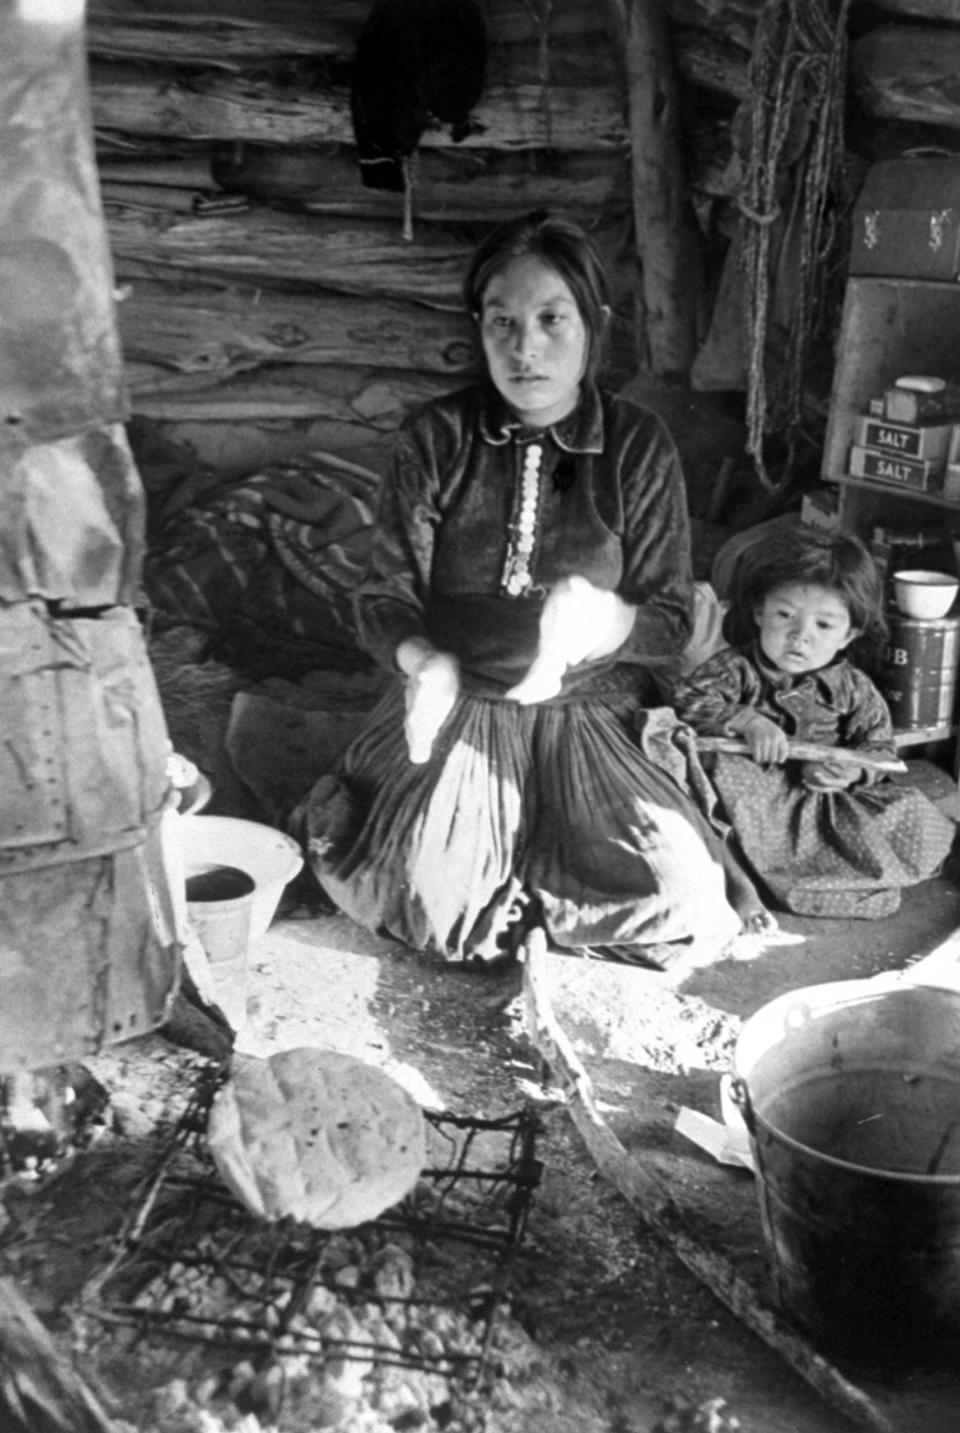 <b>Caption from LIFE.</b> Baking bread, a woman kneels by the fire while loaf cooks on crude metal grill. This native bread is a major item of Navajo diet.